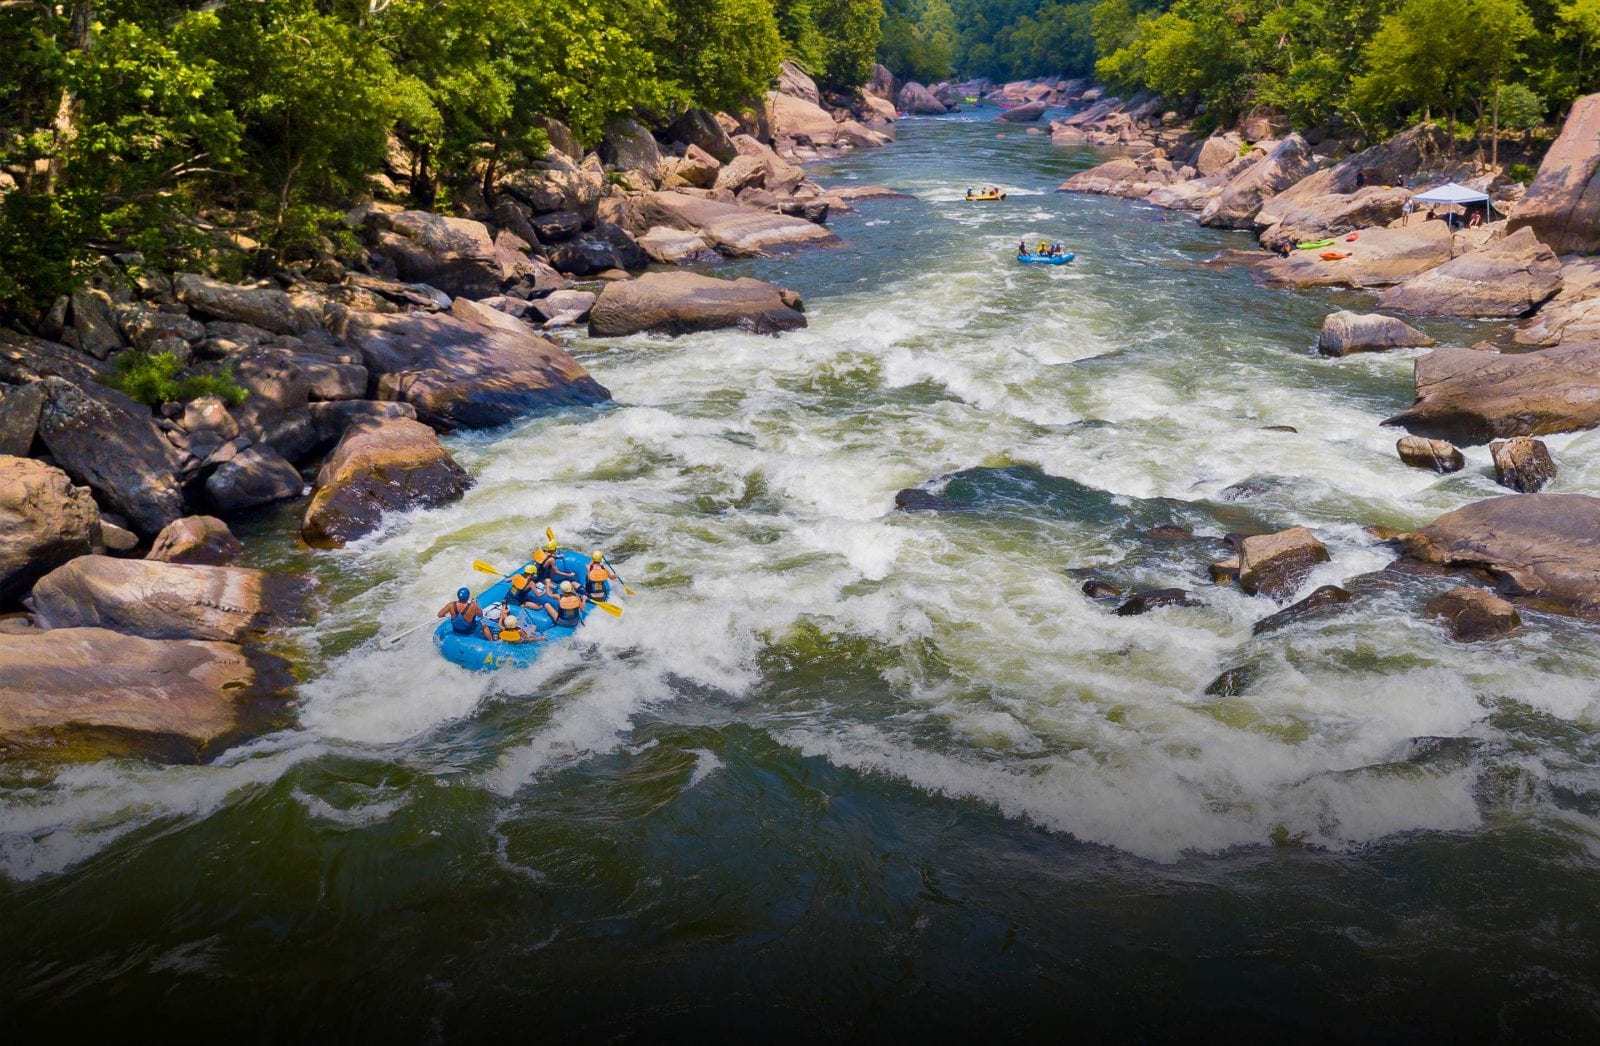 White water rafting guest challenge Lower Keeney Rapid on the Lower New River Gorge in West Virginia.